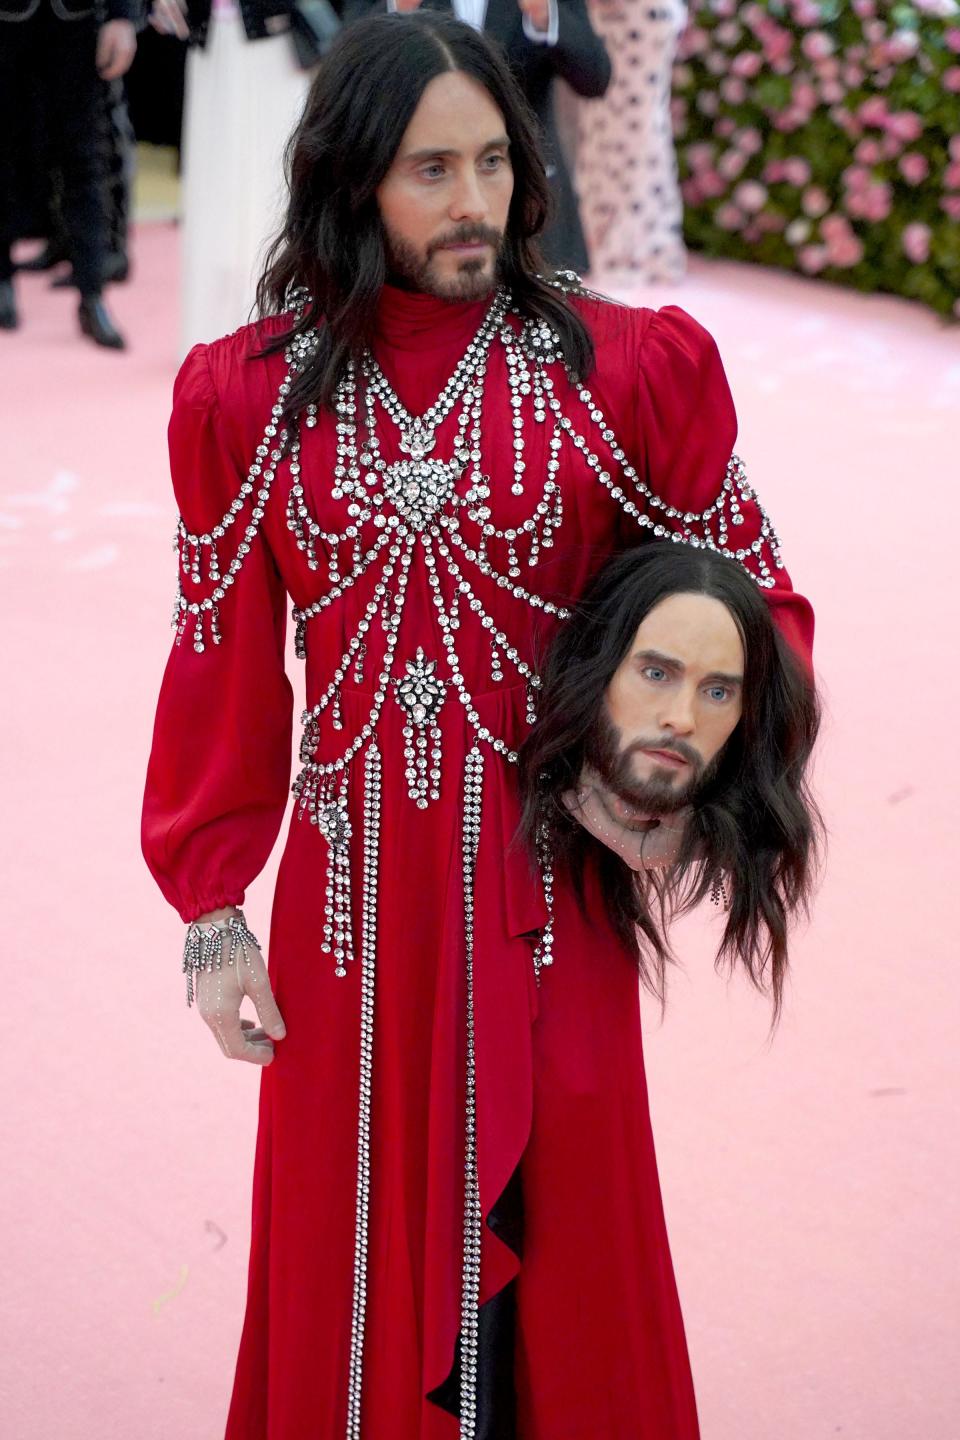 Jared Leto attends The Metropolitan Museum Of Art's 2019 Costume Institute Benefit "Camp: Notes On Fashion."